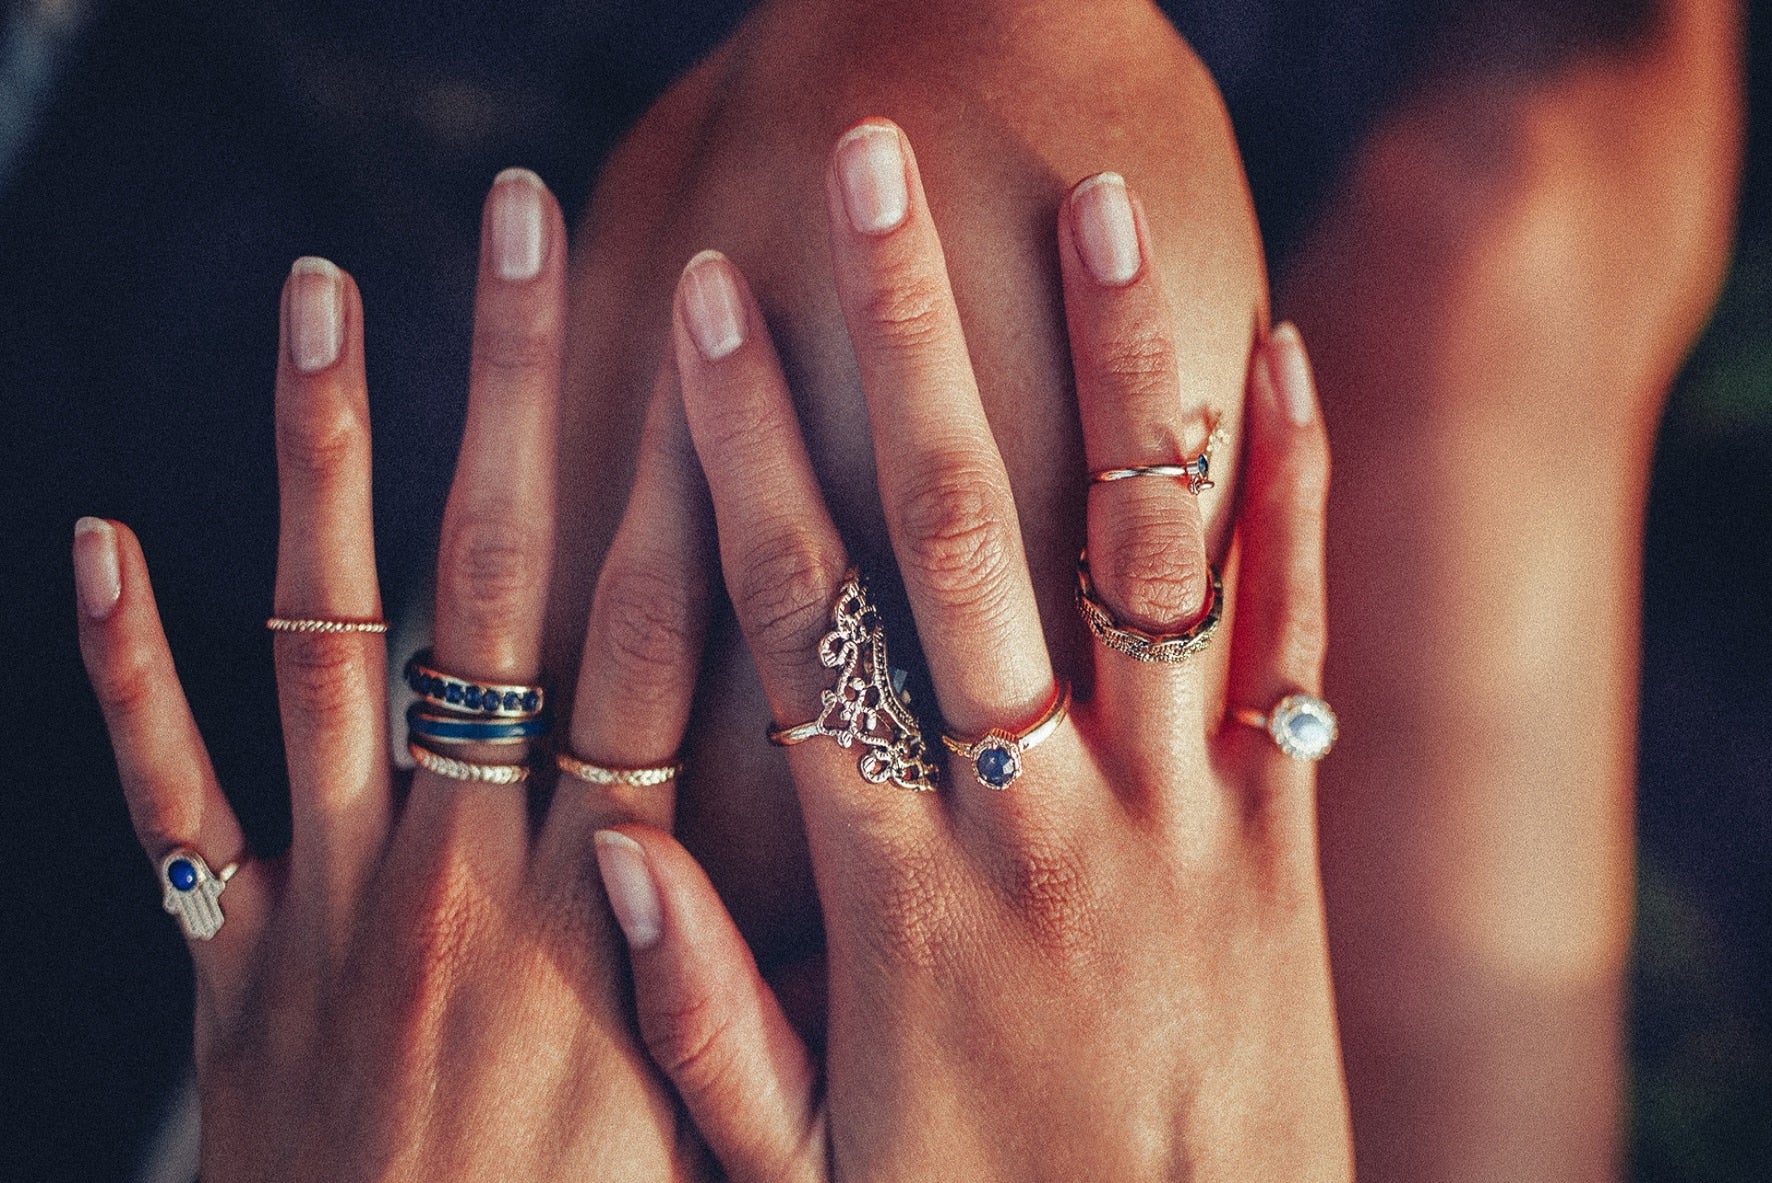 20 secrets for buying a woman's jewelry